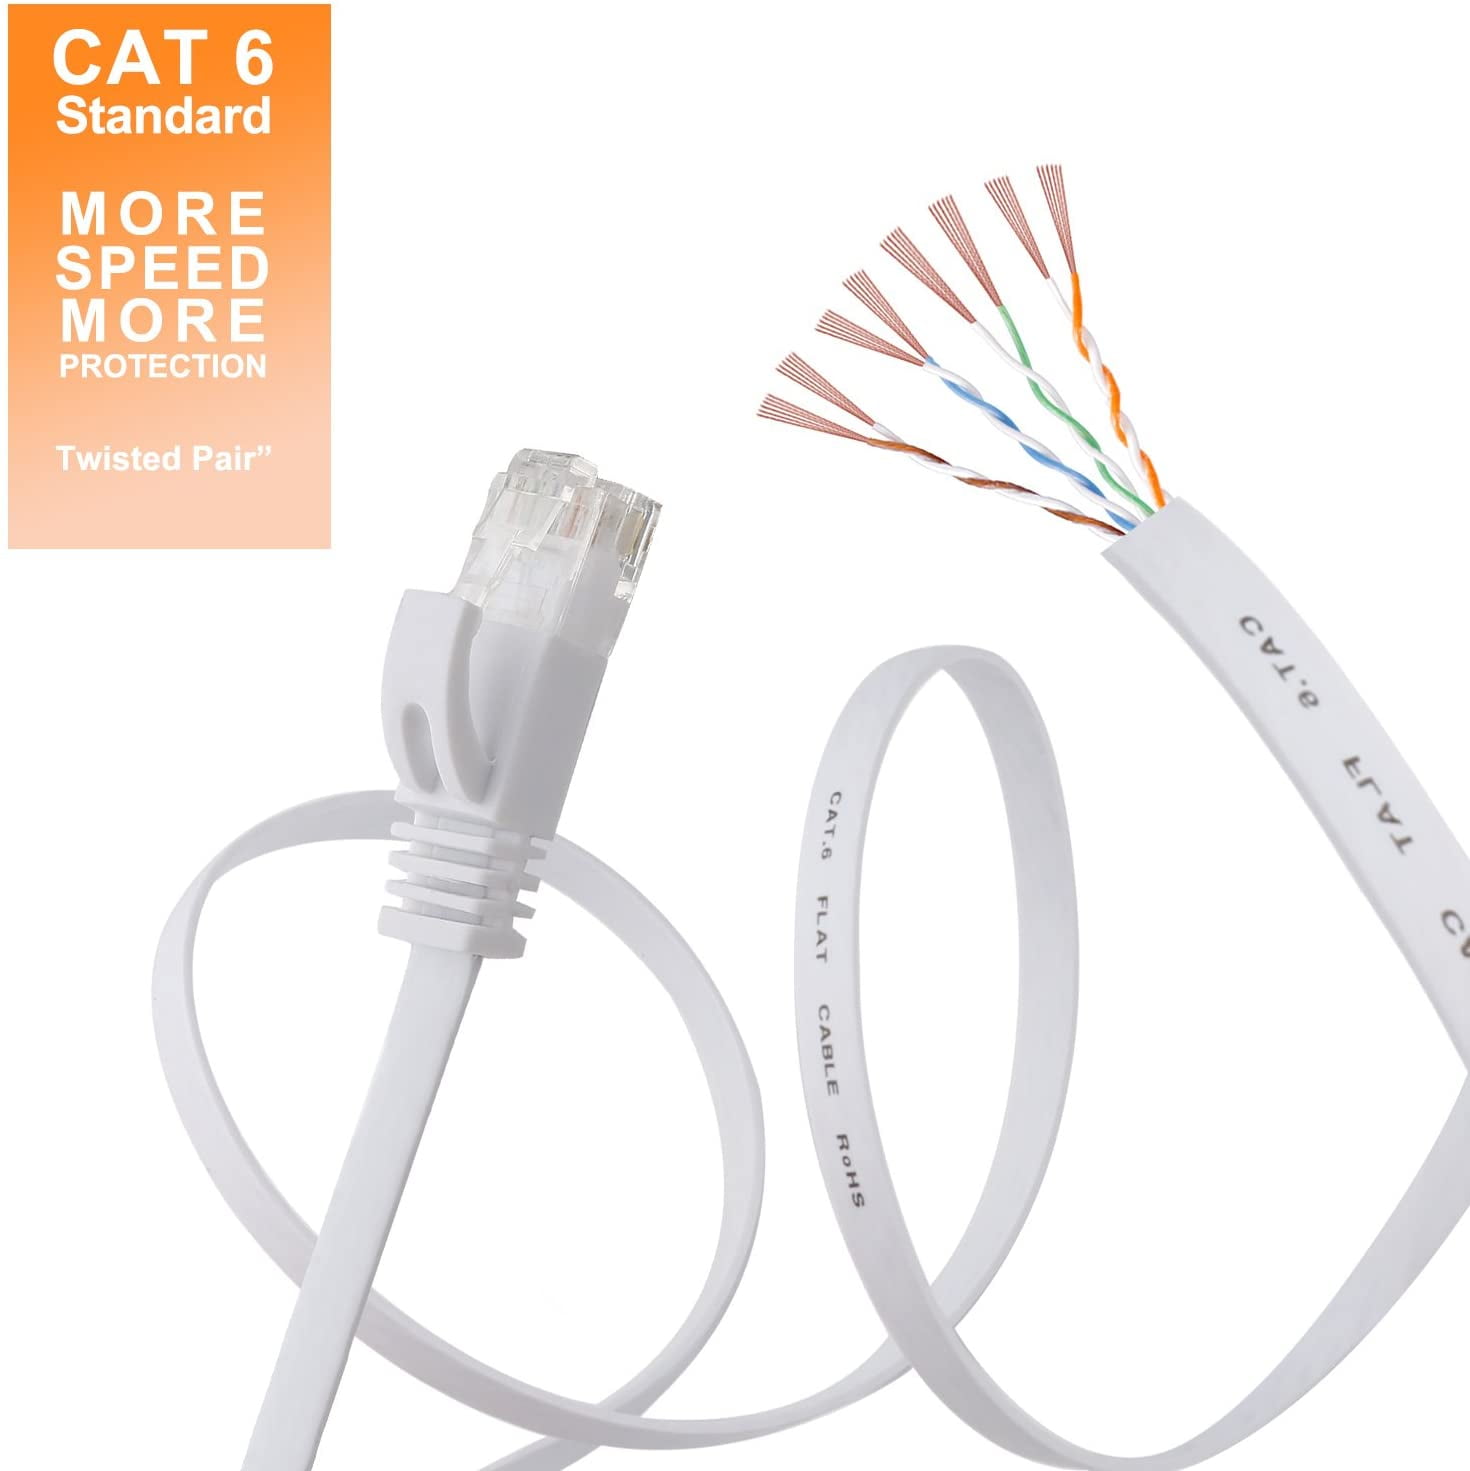 Ancable Ghost Wire Flat Ethernet Jumper Cable for Cat5 or Cat6 Cable 